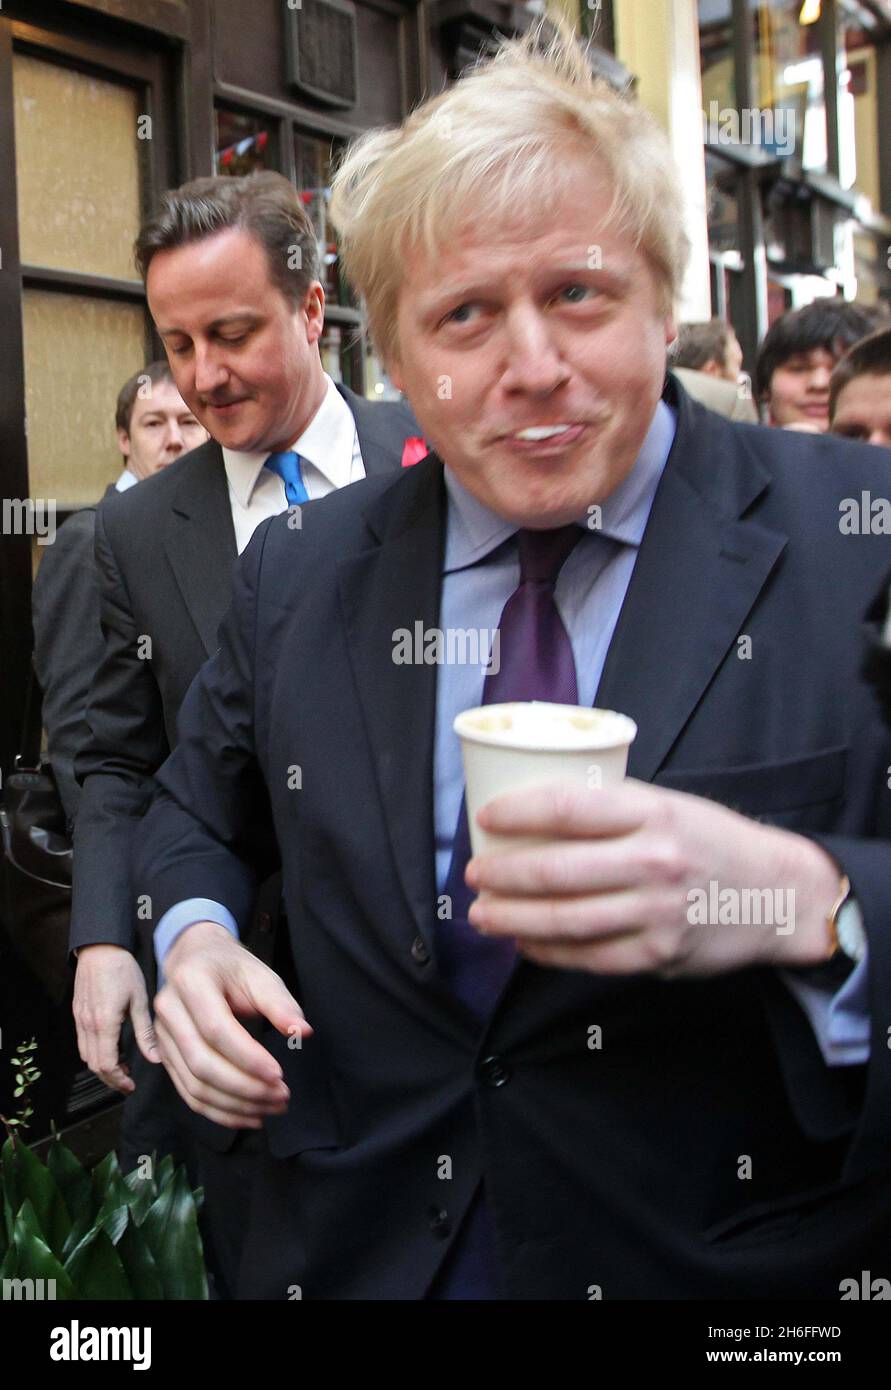 Conservative party leader David Cameron joined London Mayor Boris Johnson at St George's day celebrations in Leadenhall Market, London this afternoon Stock Photo